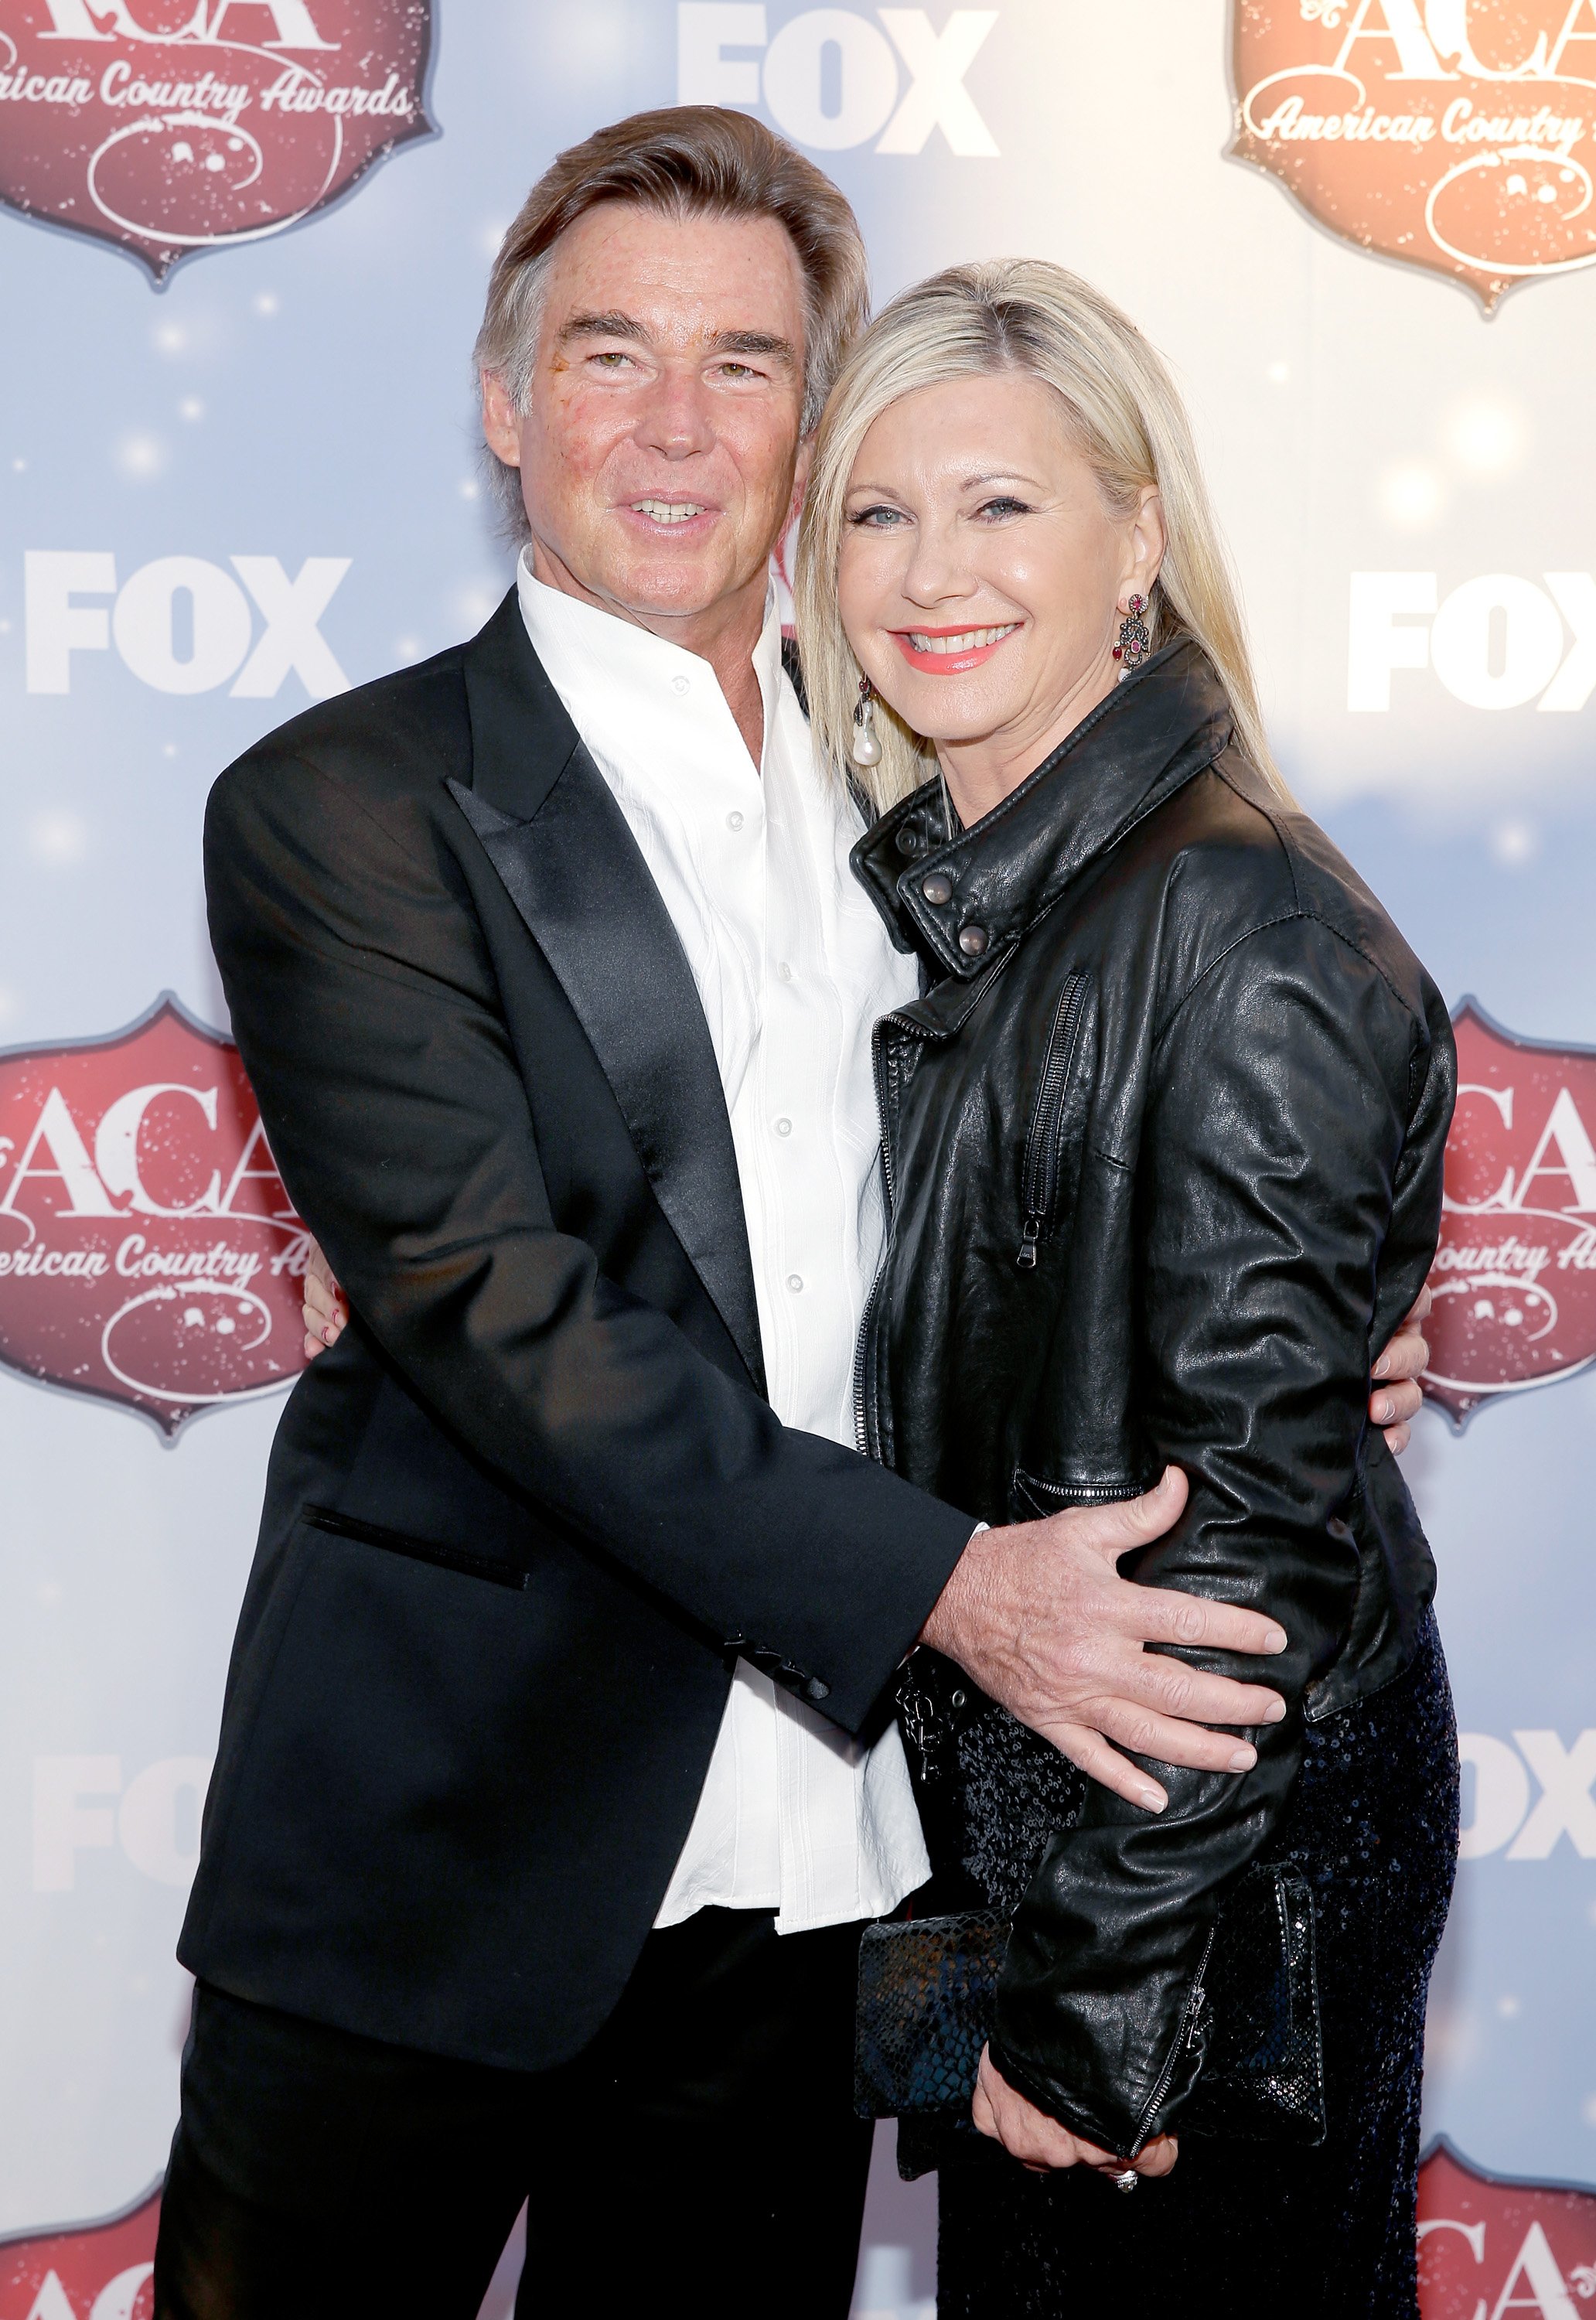 John Easterling and Olivia Newton-John at the American Country Awards on December 10, 2013 | Source: Getty Images